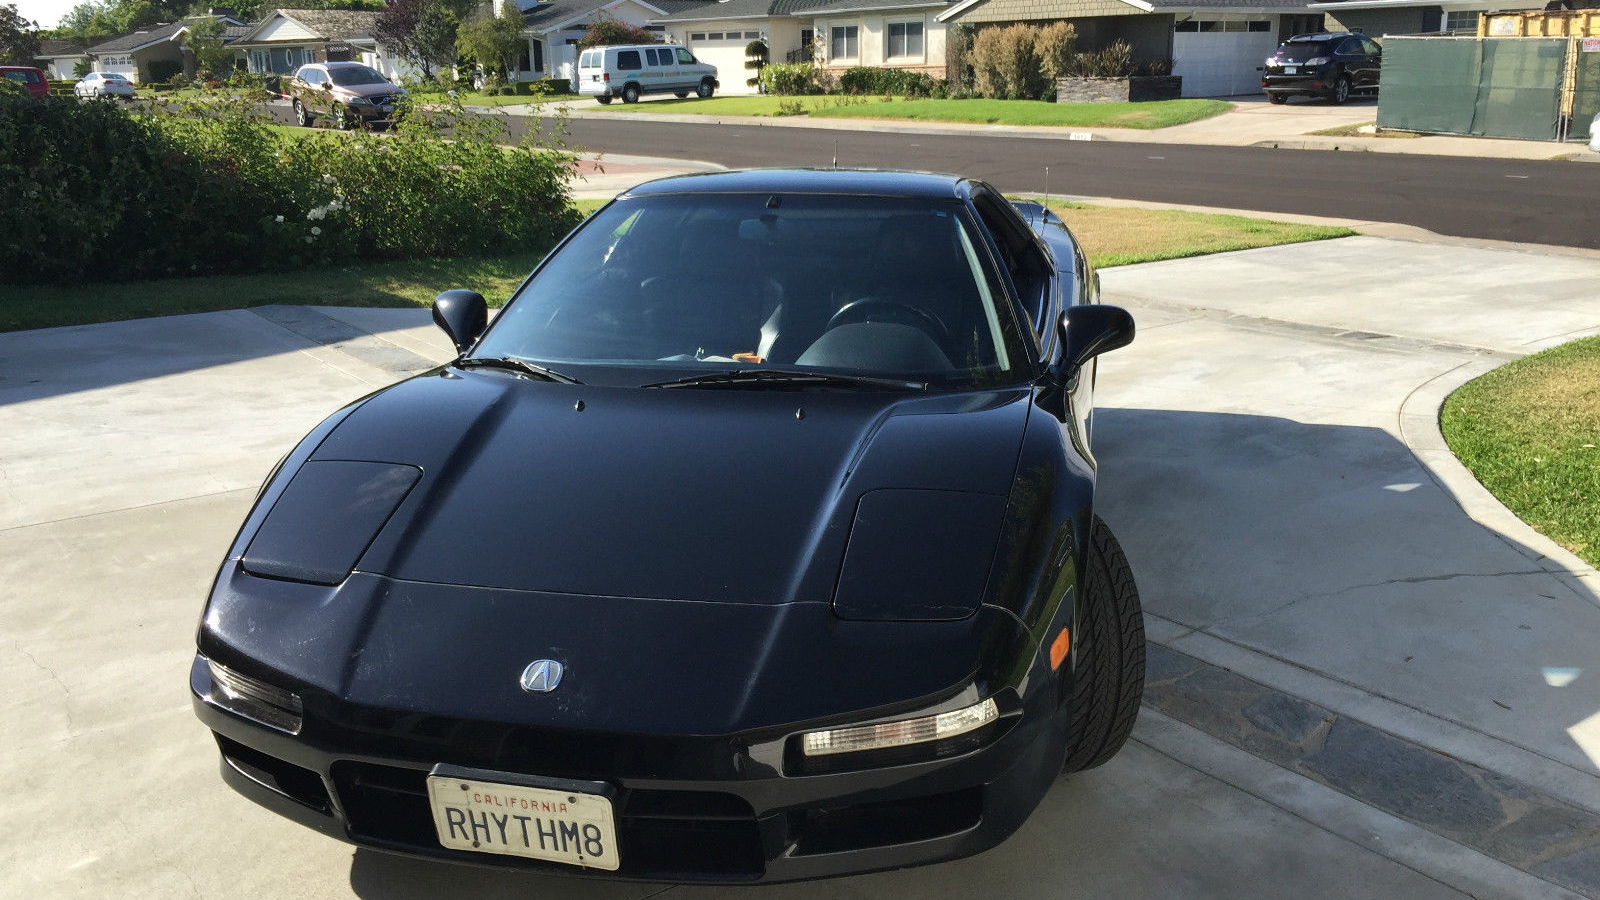 1991 Acura NSX allegedly bought by Donald Trump for second wife Marla Maples